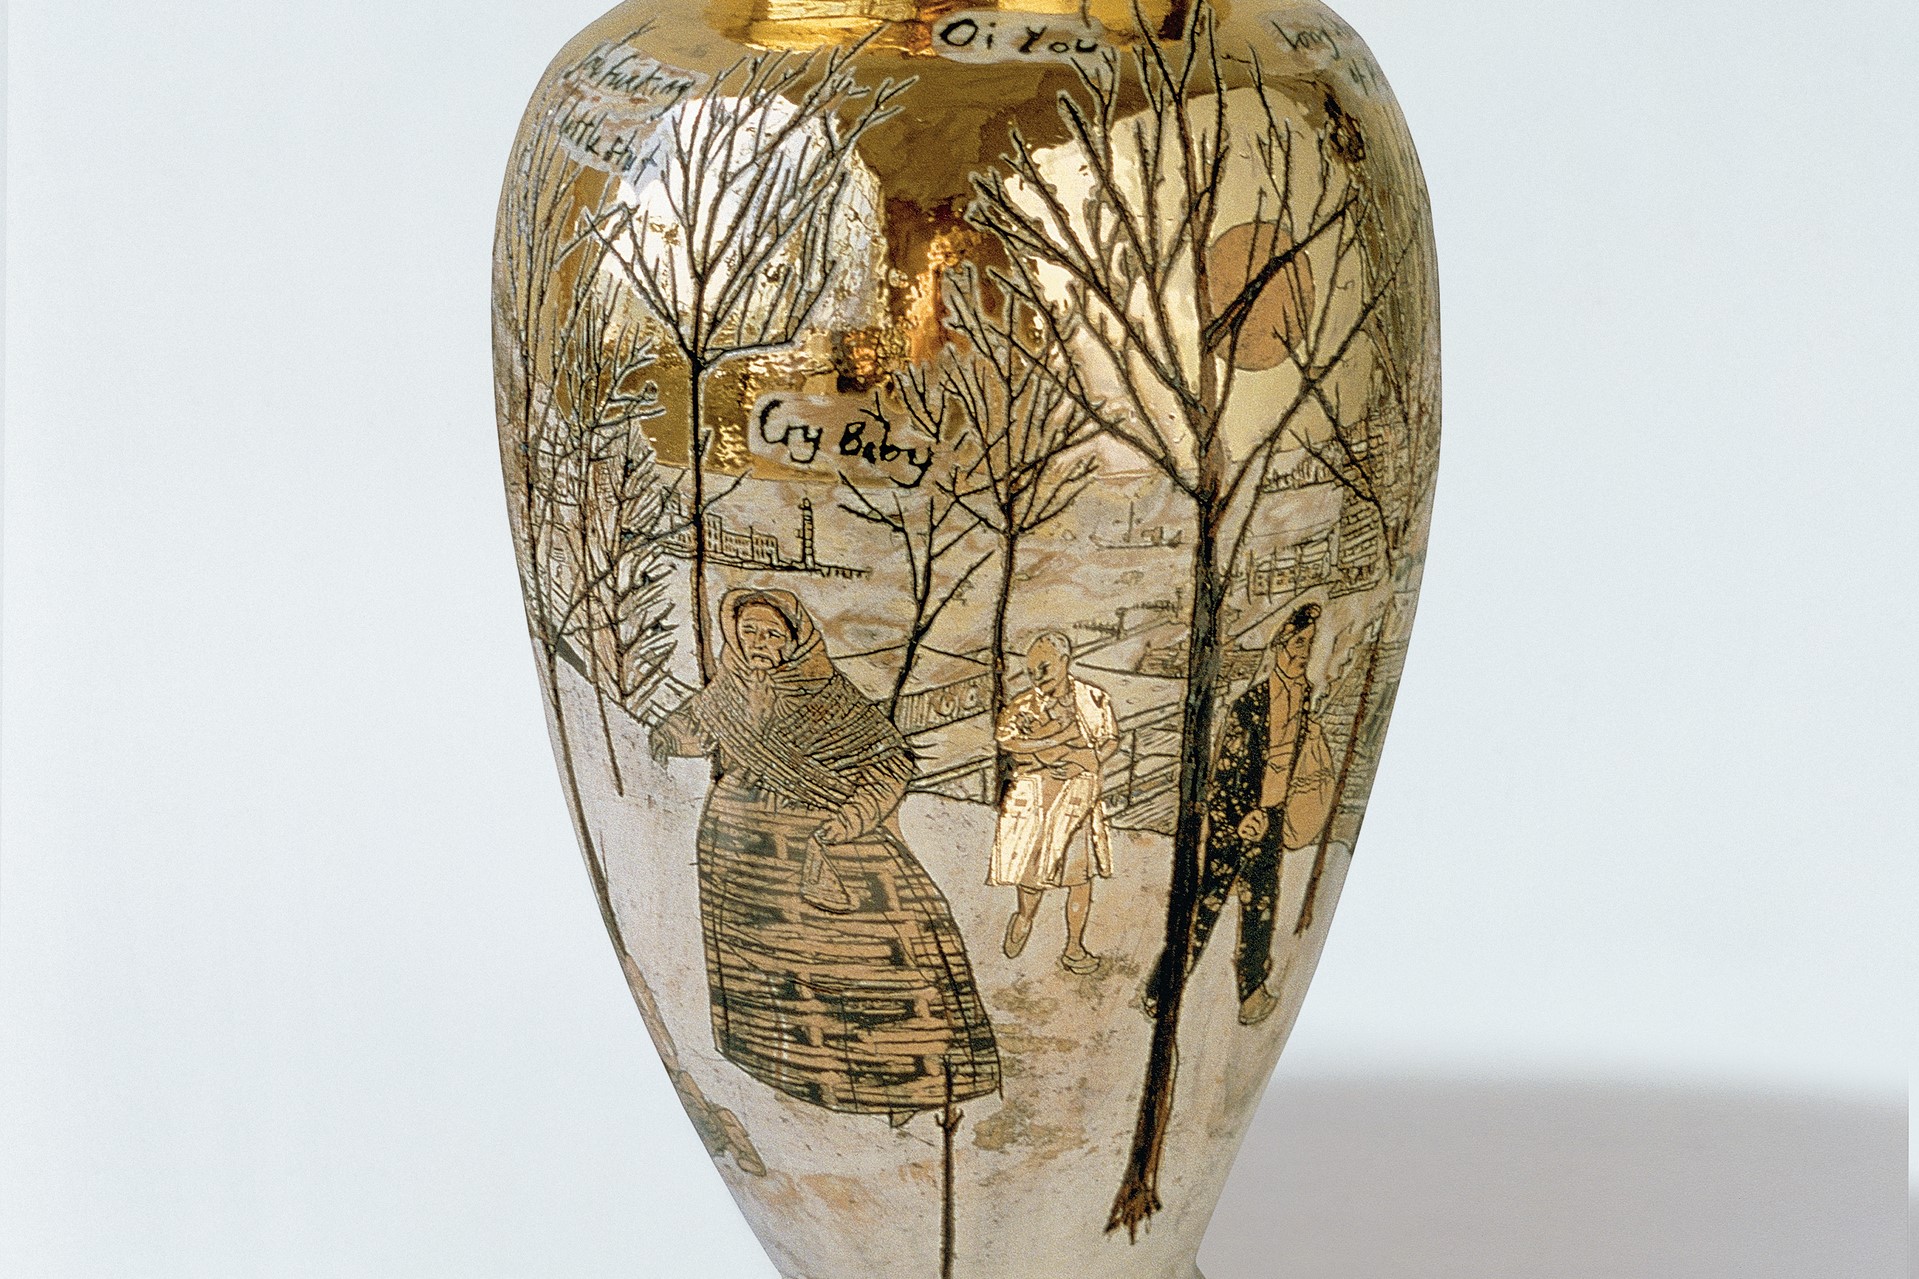 A (golden) pot by Grayson Perry